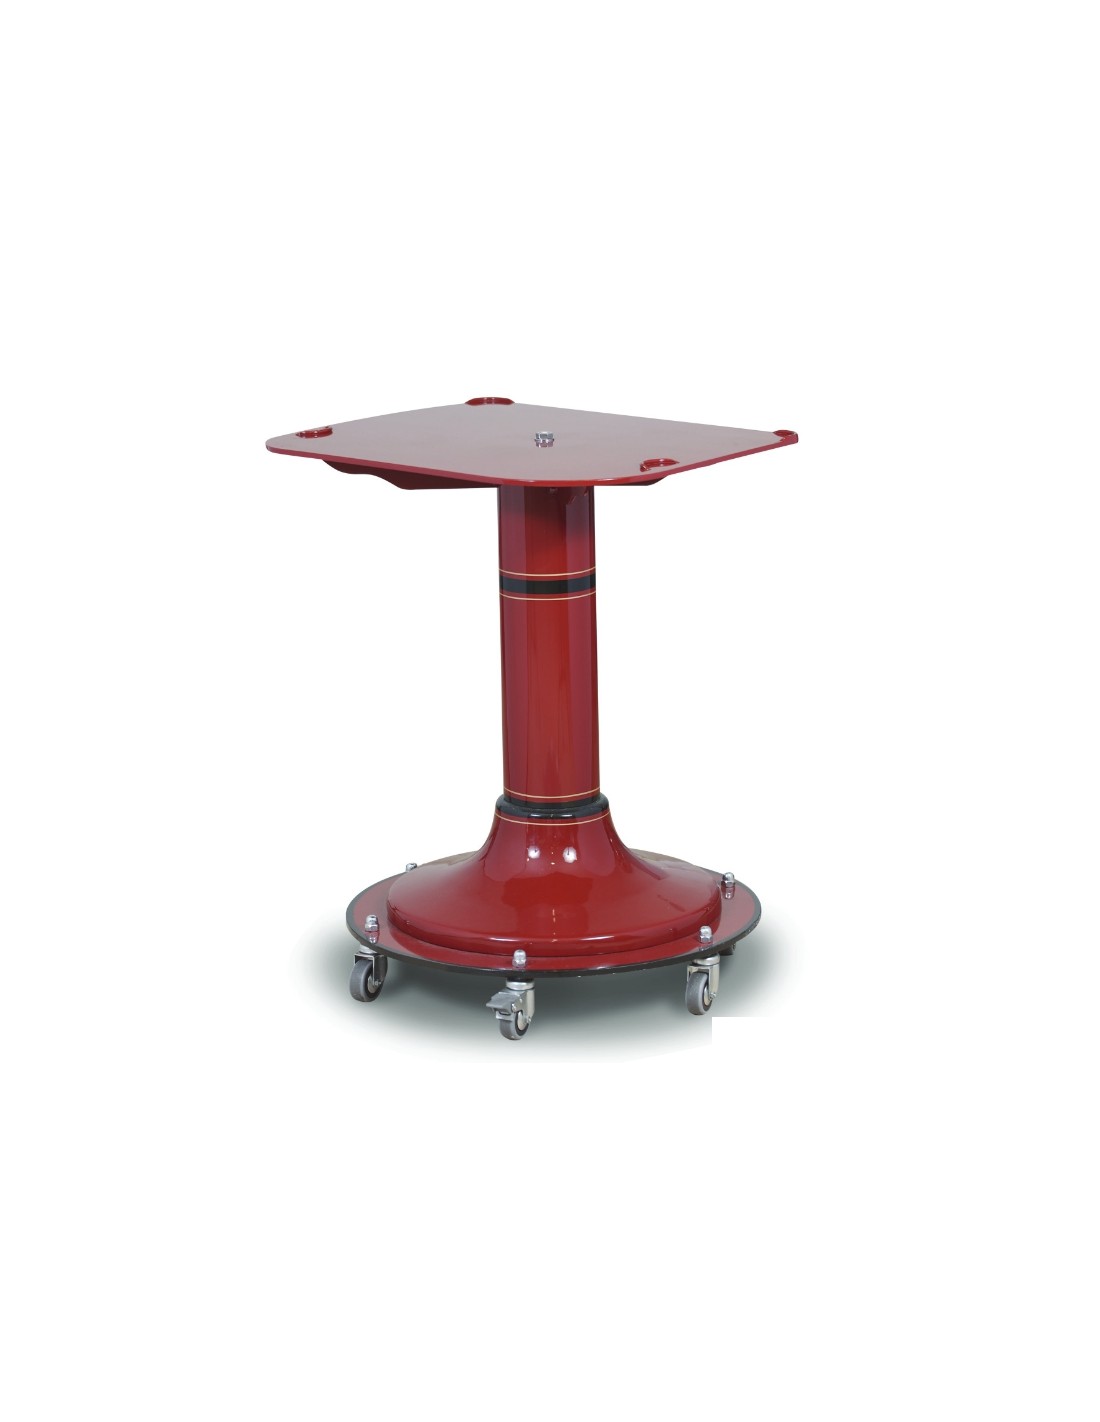 Piedistallo - Painted aluminium frame - Shaped plate with recesses for feet block - Mobile with piv wheels